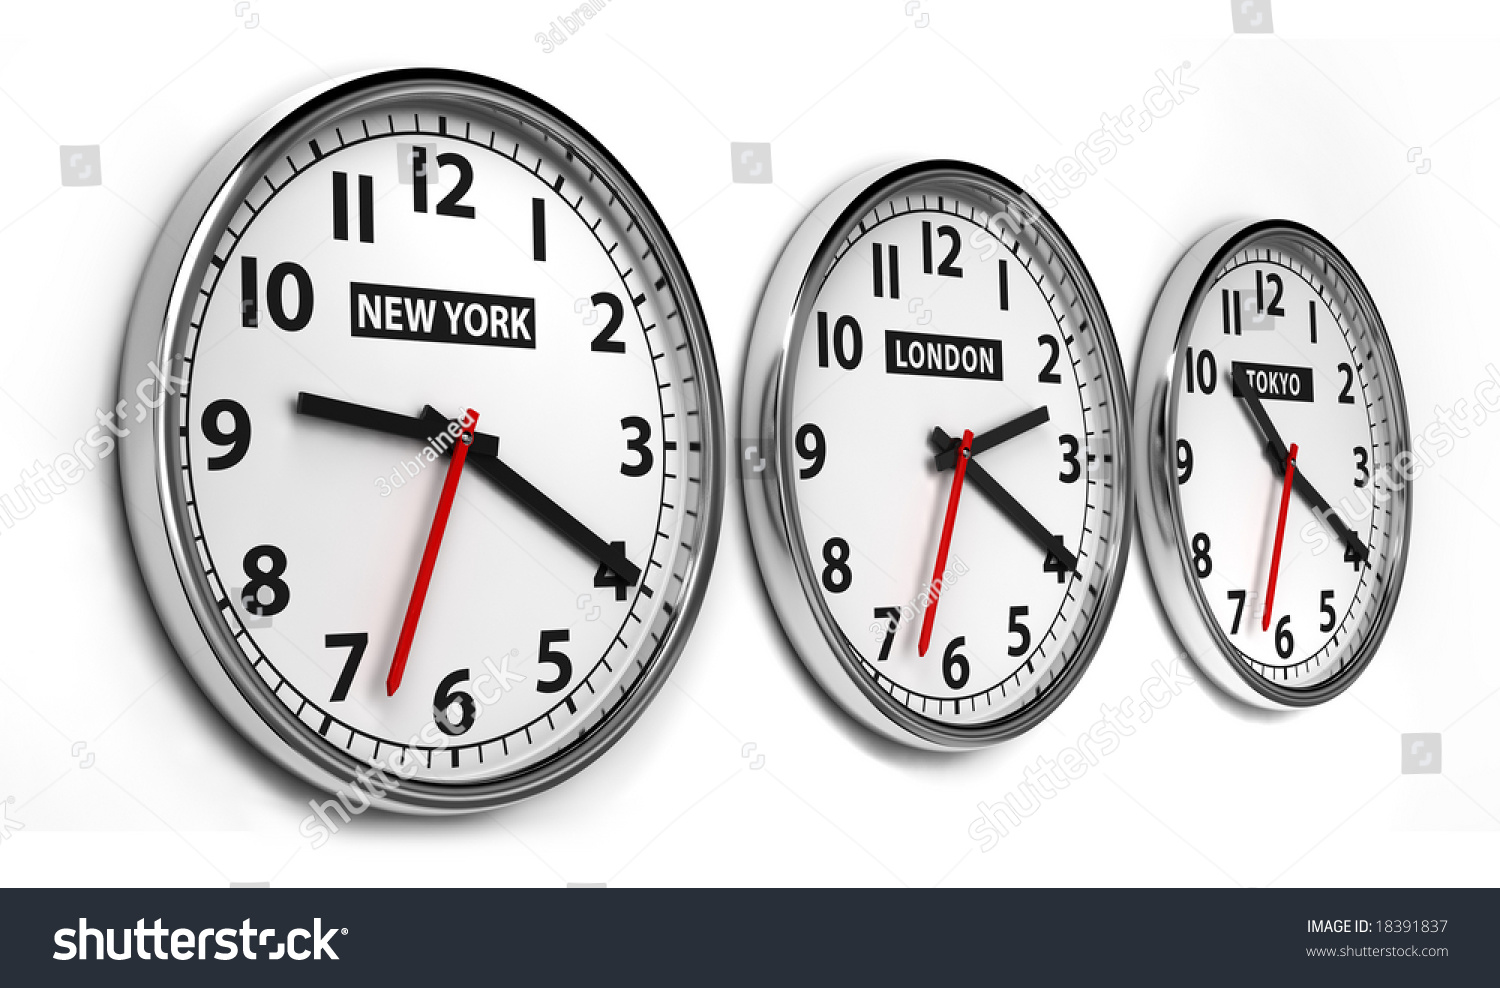 Wall Clocks Displaying Time 3 Cities Stock Illustration 18391837 ...